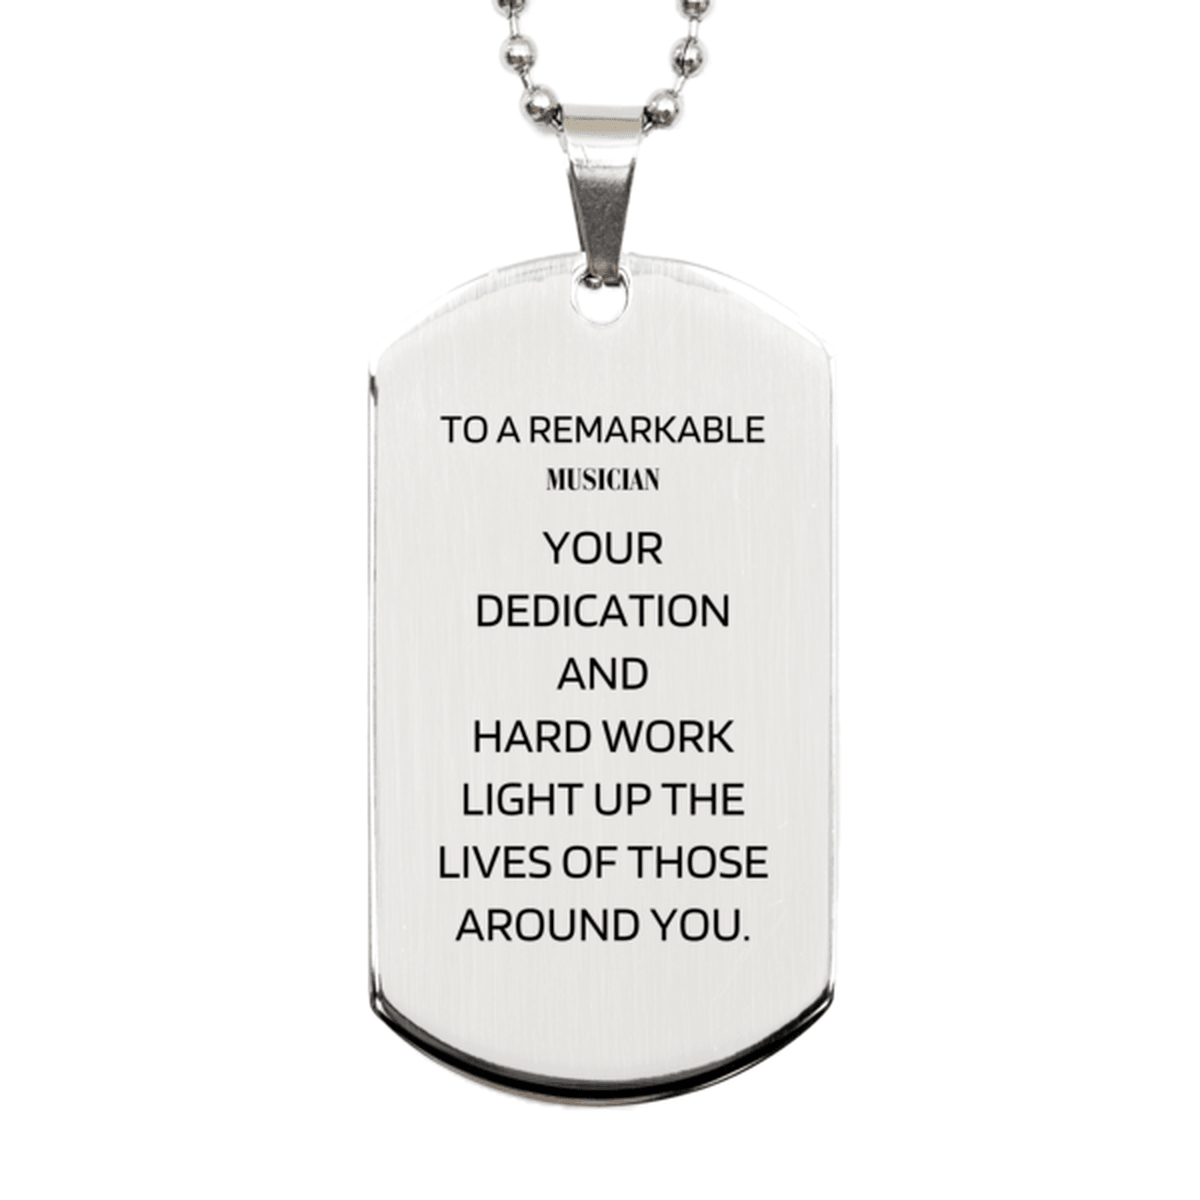 Remarkable Musician Gifts, Your dedication and hard work, Inspirational Birthday Christmas Unique Silver Dog Tag For Musician, Coworkers, Men, Women, Friends - Mallard Moon Gift Shop